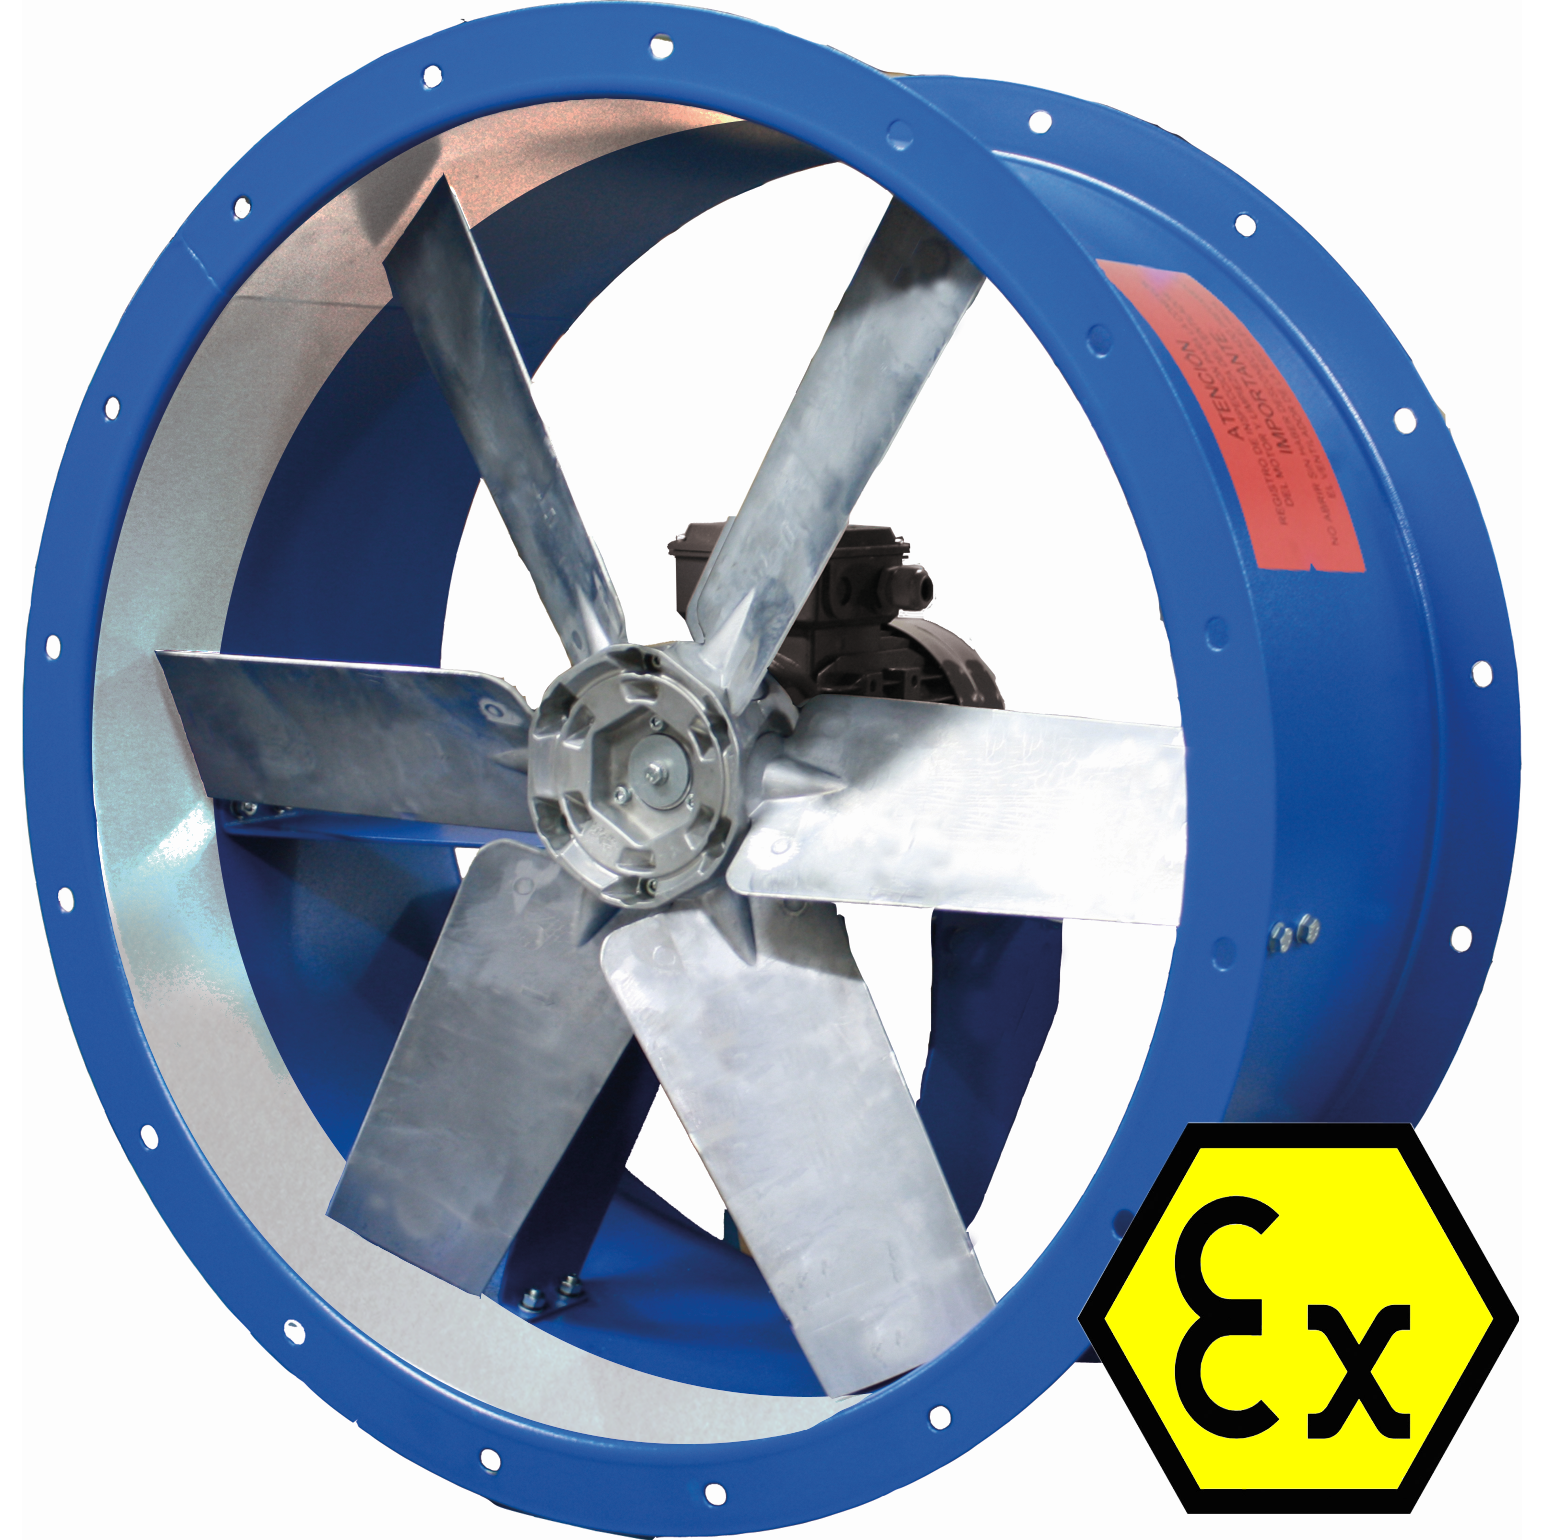 ATEX Explosion Proof Fans